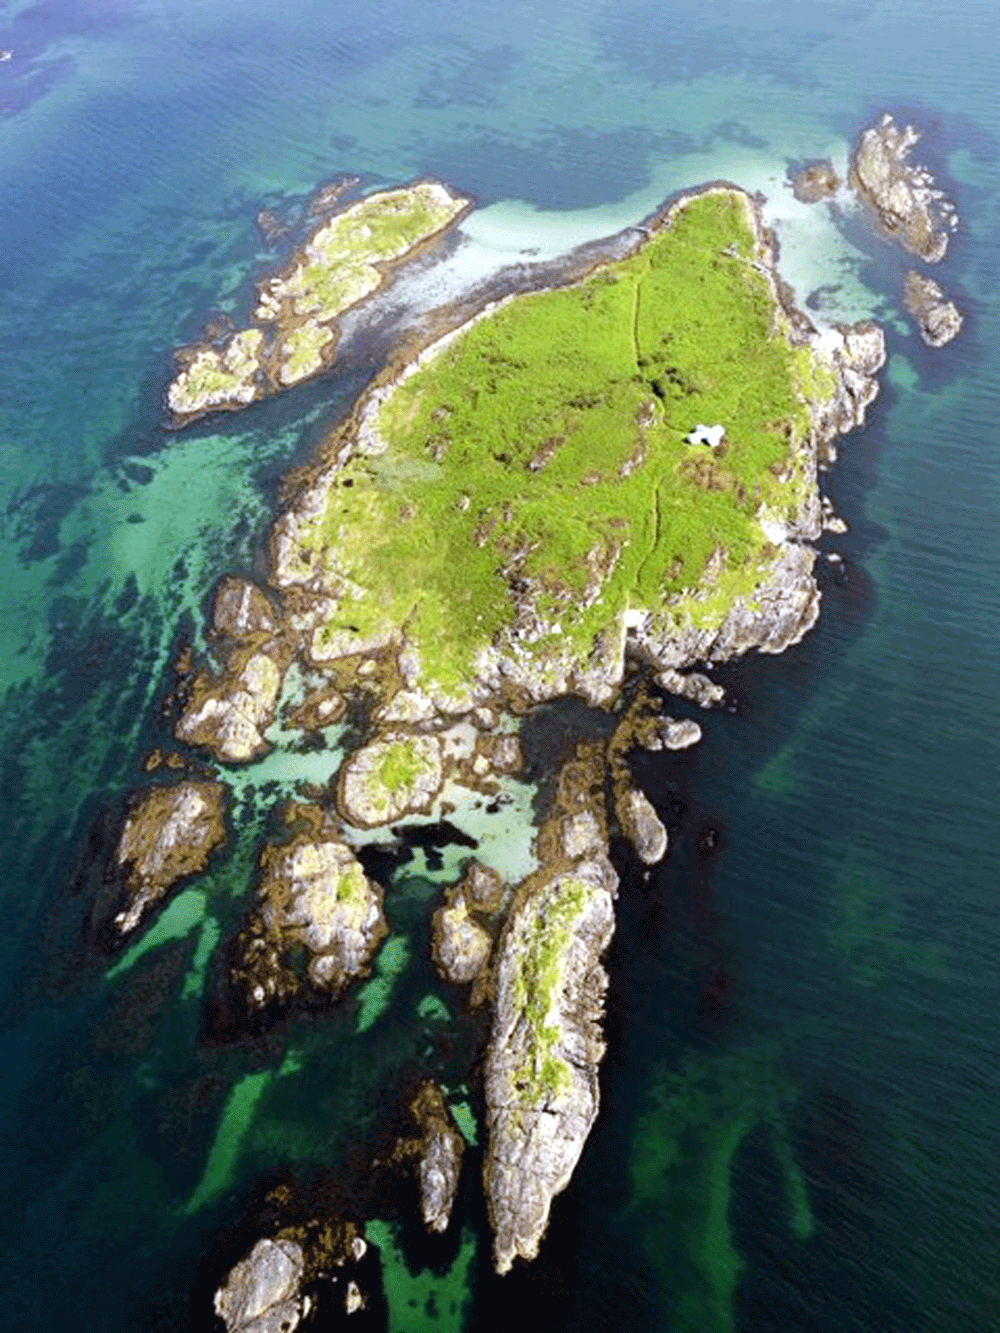 The island from above